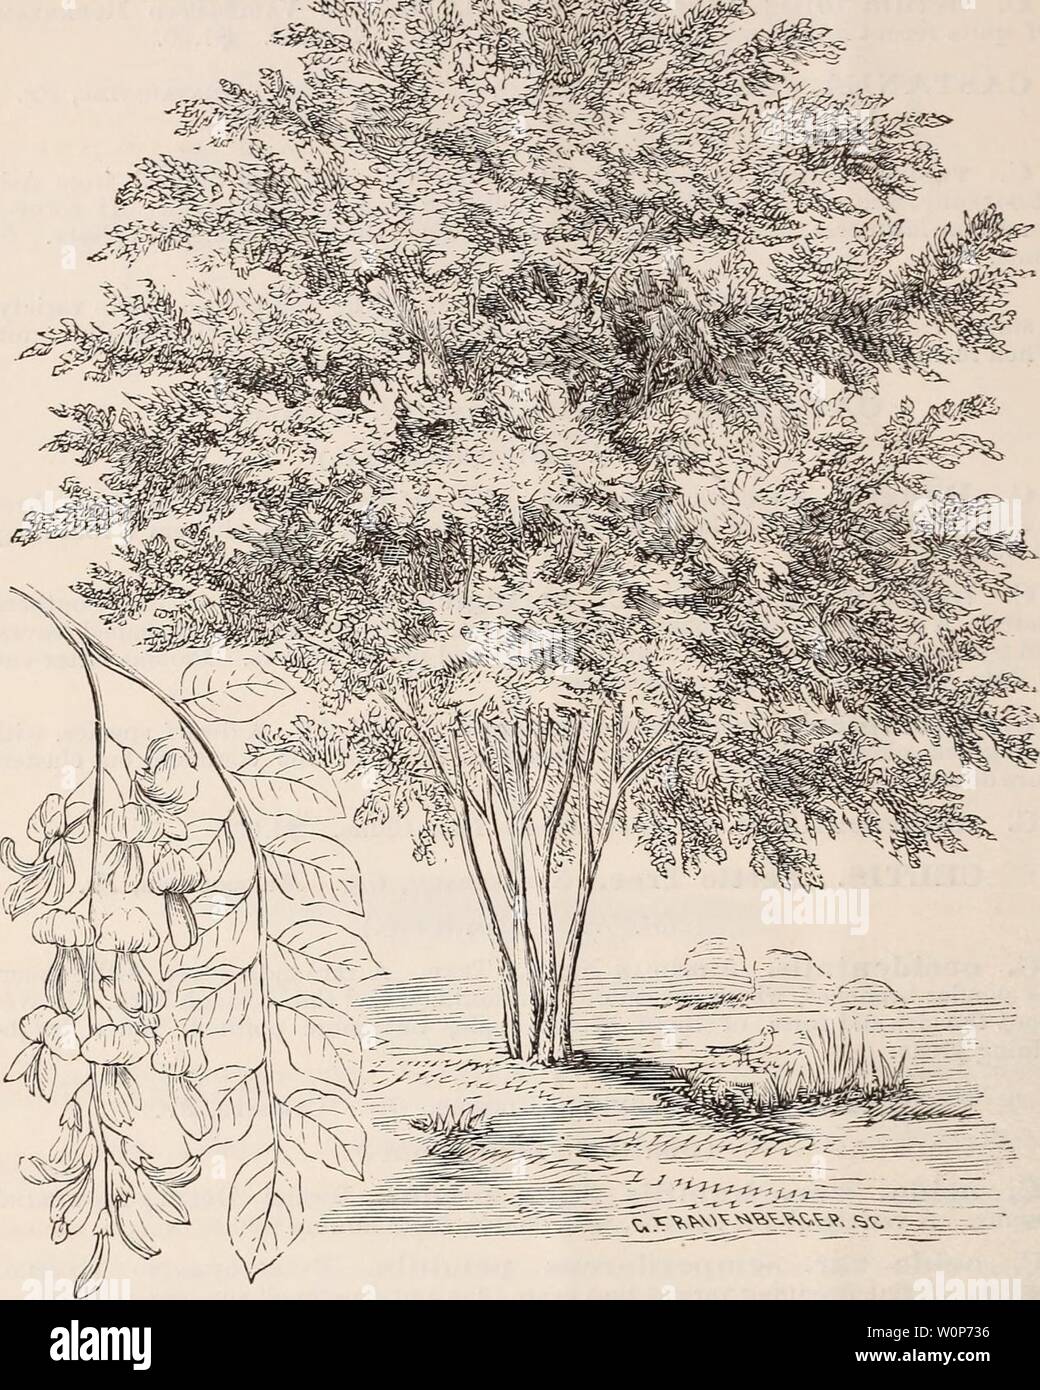 Archive image from page 19 of Descriptive catalogue of ornamental trees,. Descriptive catalogue of ornamental trees, shrubs, roses, flowering plants, &c descriptivecatal1875ellw Year: 1875  16 ELLWANGER d: BARRY'S CATALOGUE.    :,,=.-';5''5'&gt;'V'i?, .c»&lt;2, -73 CLADASTRIS TINCTORIA. Sljll. VIRGTLEA LUTEA, (Yellow Wood.) O. Sieboldii rubra plena. Siebold's Double Eed-floweking Cheery. $1.00. The last two are said to be remarkable varieties from Japau. Flowers large and fine. CERCIS. Judas' Tree, or Red Bud. Judas BAmr, Gar. Gainier, Fr. {Ndt. Ord. Fabaceje.) A very ornamental native tree, Stock Photo